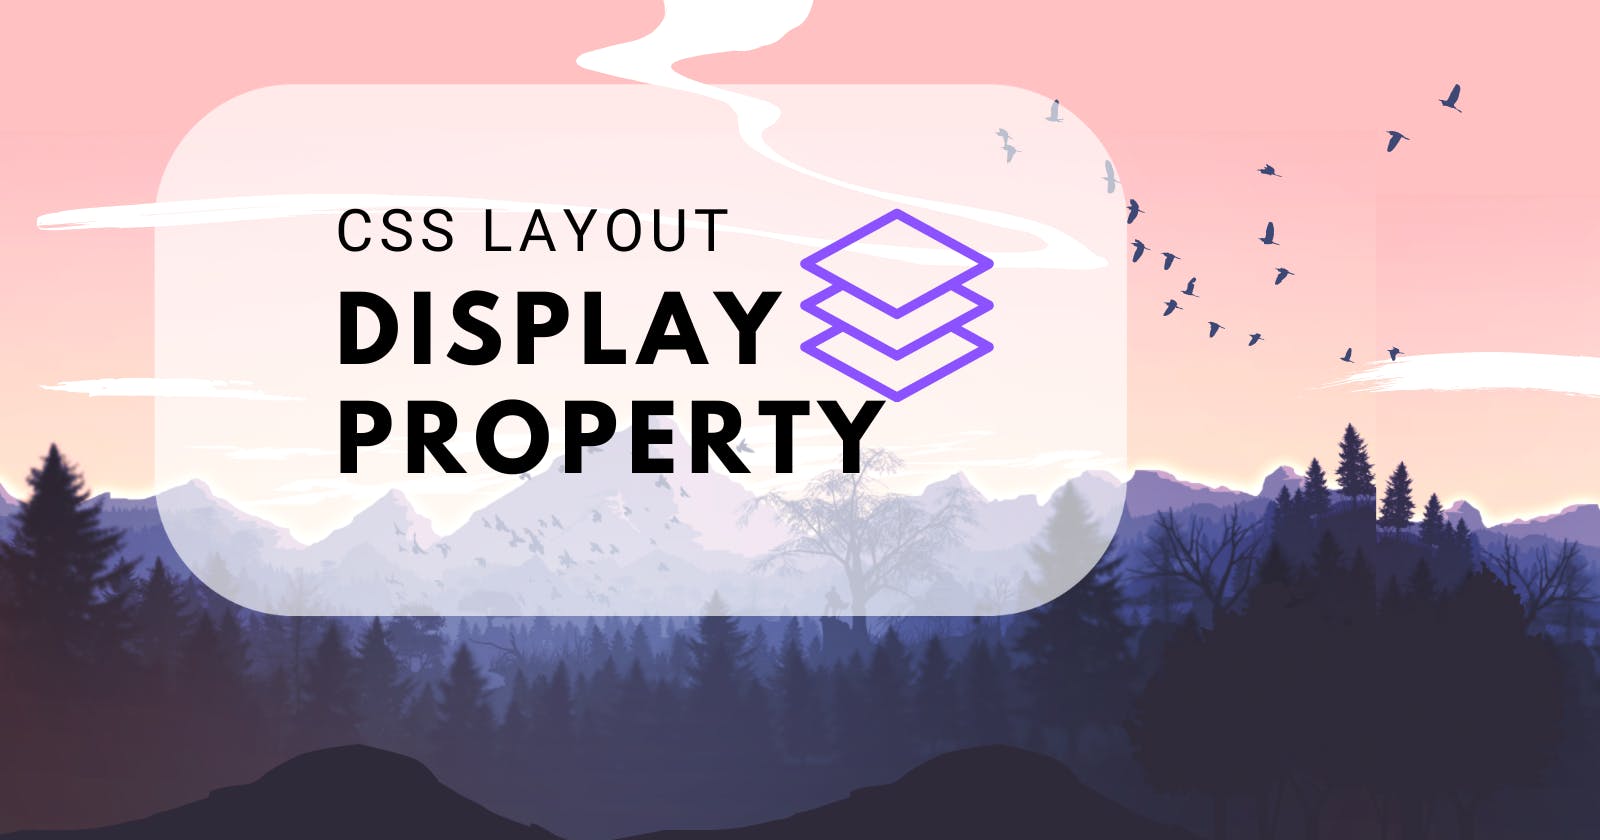 Css Layout: Display Property